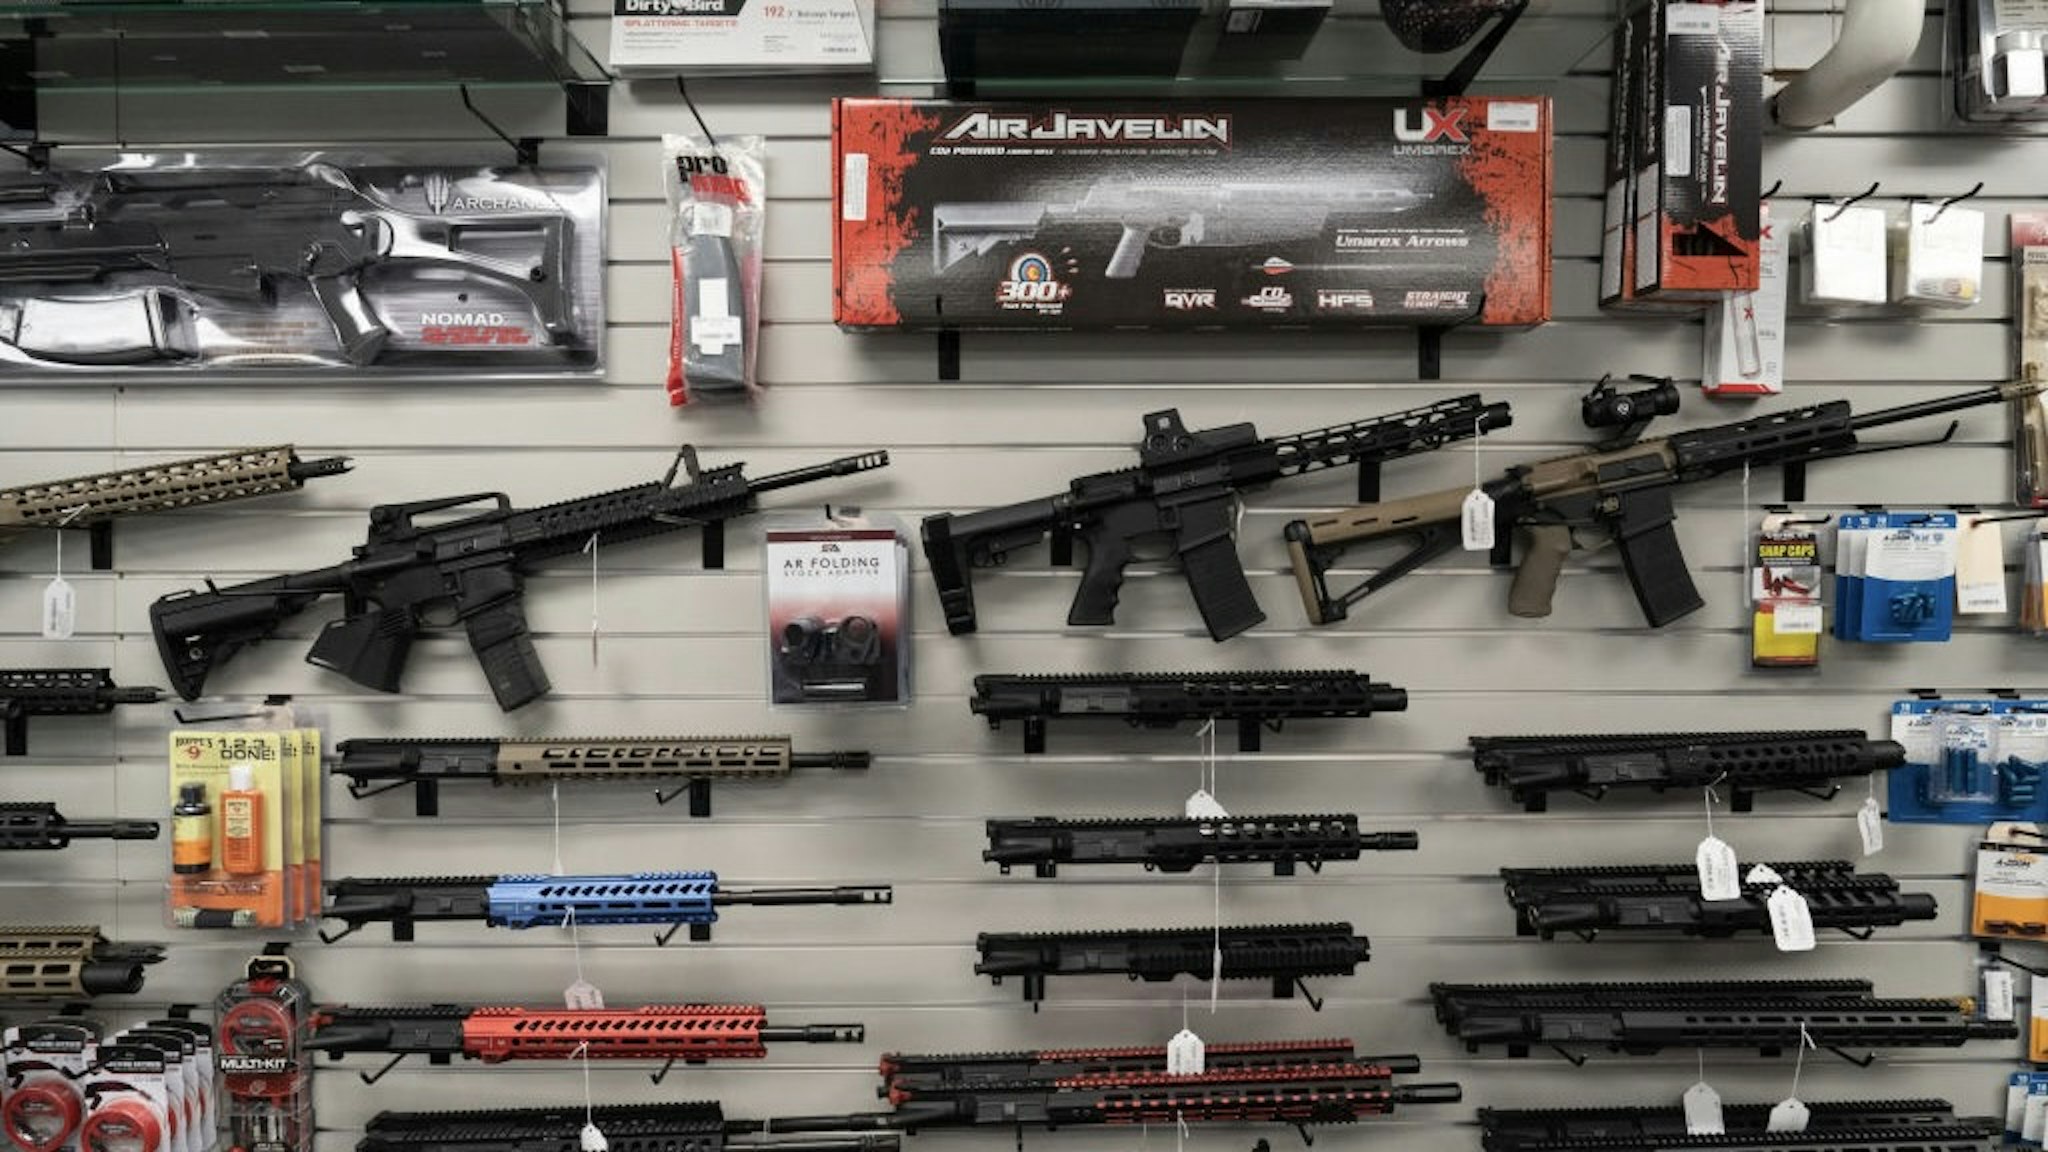 Firearm Store Sales As Biden Announces Restrictions, Including On 'Ghost Guns' California-compliant AR-15 rifles, upper receivers and gun accessories for sale at Hiram's Guns / Firearms Unknown store in El Cajon, California, U.S., on Monday, April 26, 2021. President Joe Biden's planned executive actions would crack down on "ghost guns," which can be assembled from kits and are not traceable by law enforcement because they lack serial numbers, as well as braces for pistols that make firearms more stable and accurate. Photographer: Bing Guan/Bloomberg via Getty Images Bloomberg / Contributor